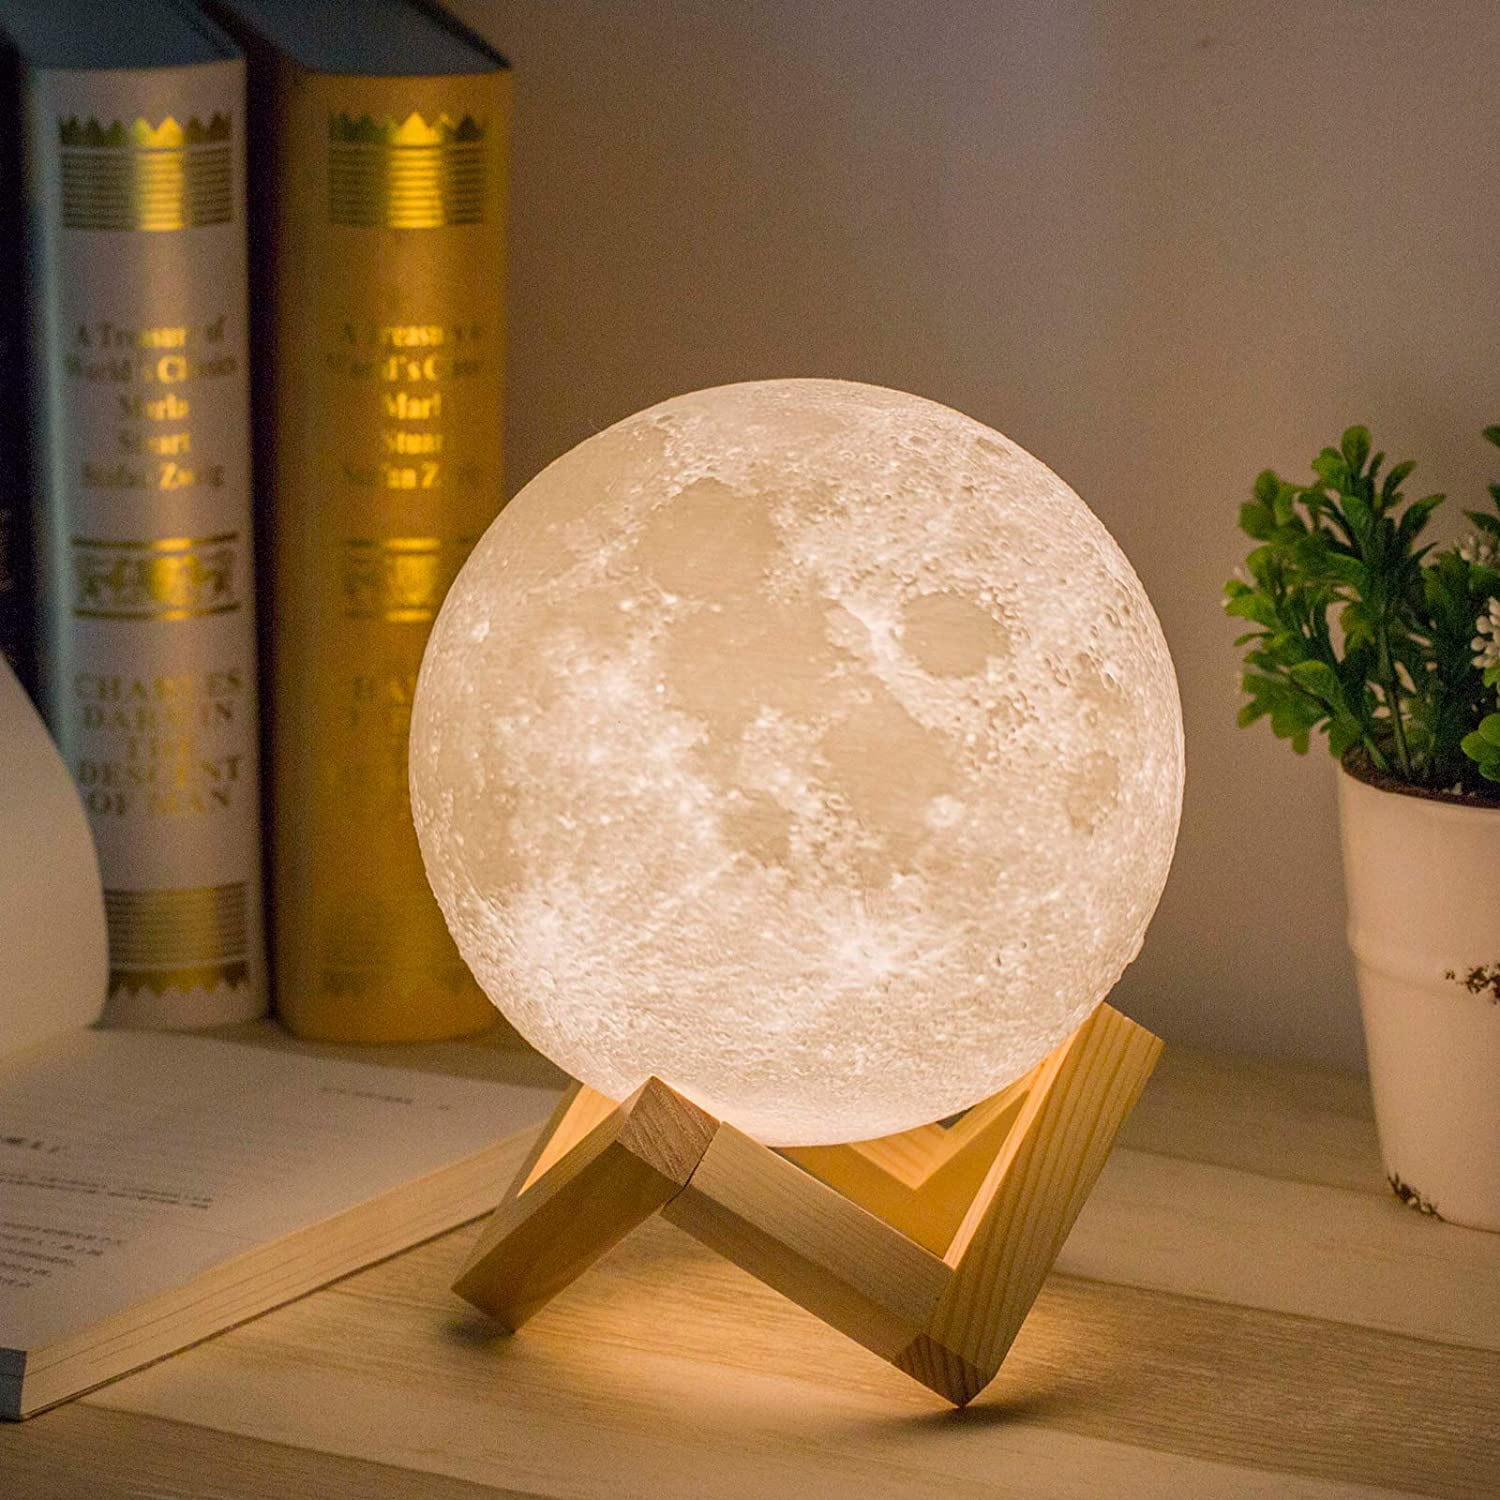 BRIGHTWORLD Moon Lamp 3.5 inch 3D Printing Lunar Lamp Night Light with White as 